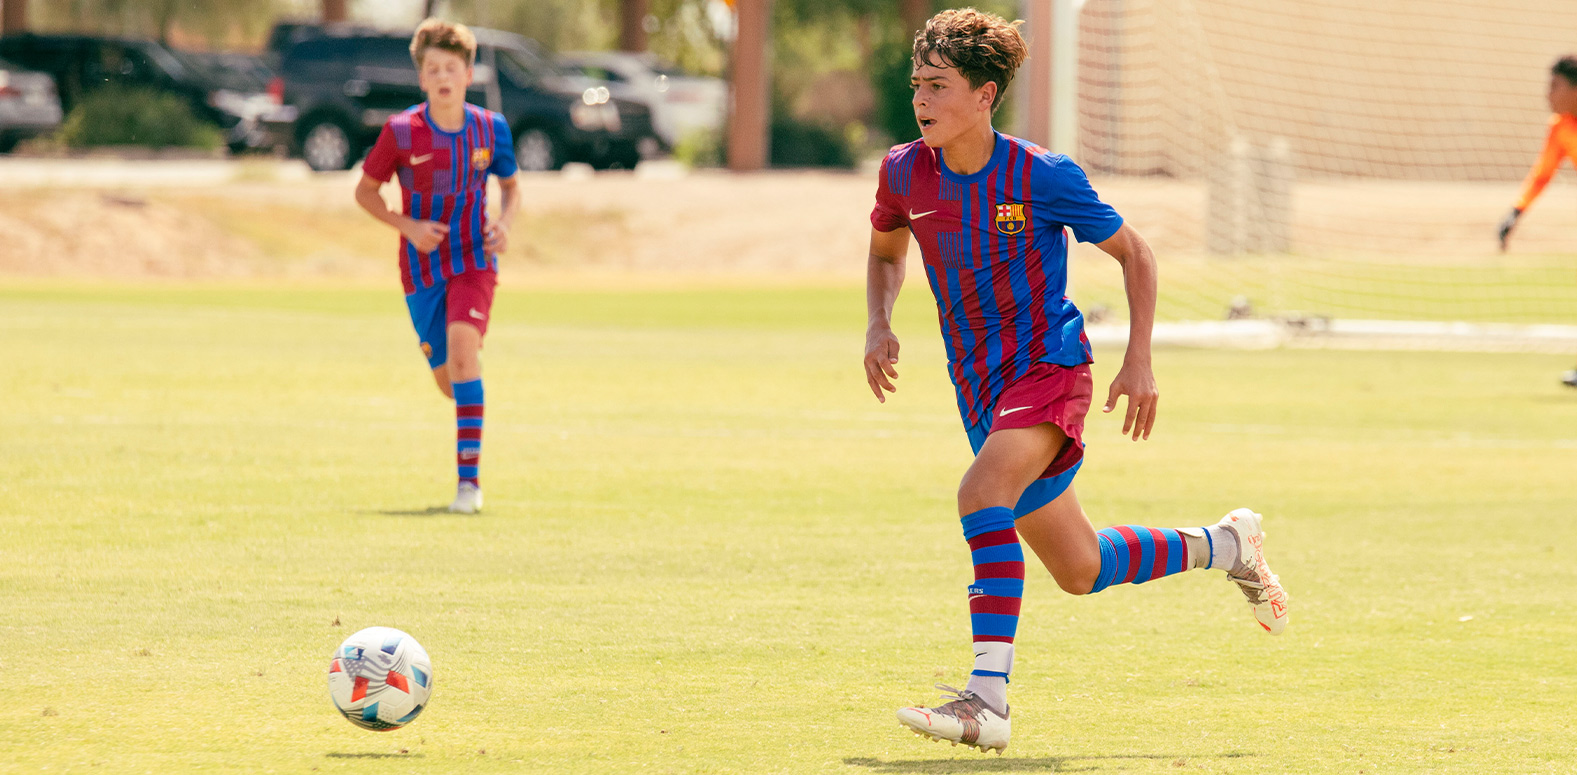 Barca Residency Academy U-15 player Sean Petrie driving the ball up the field